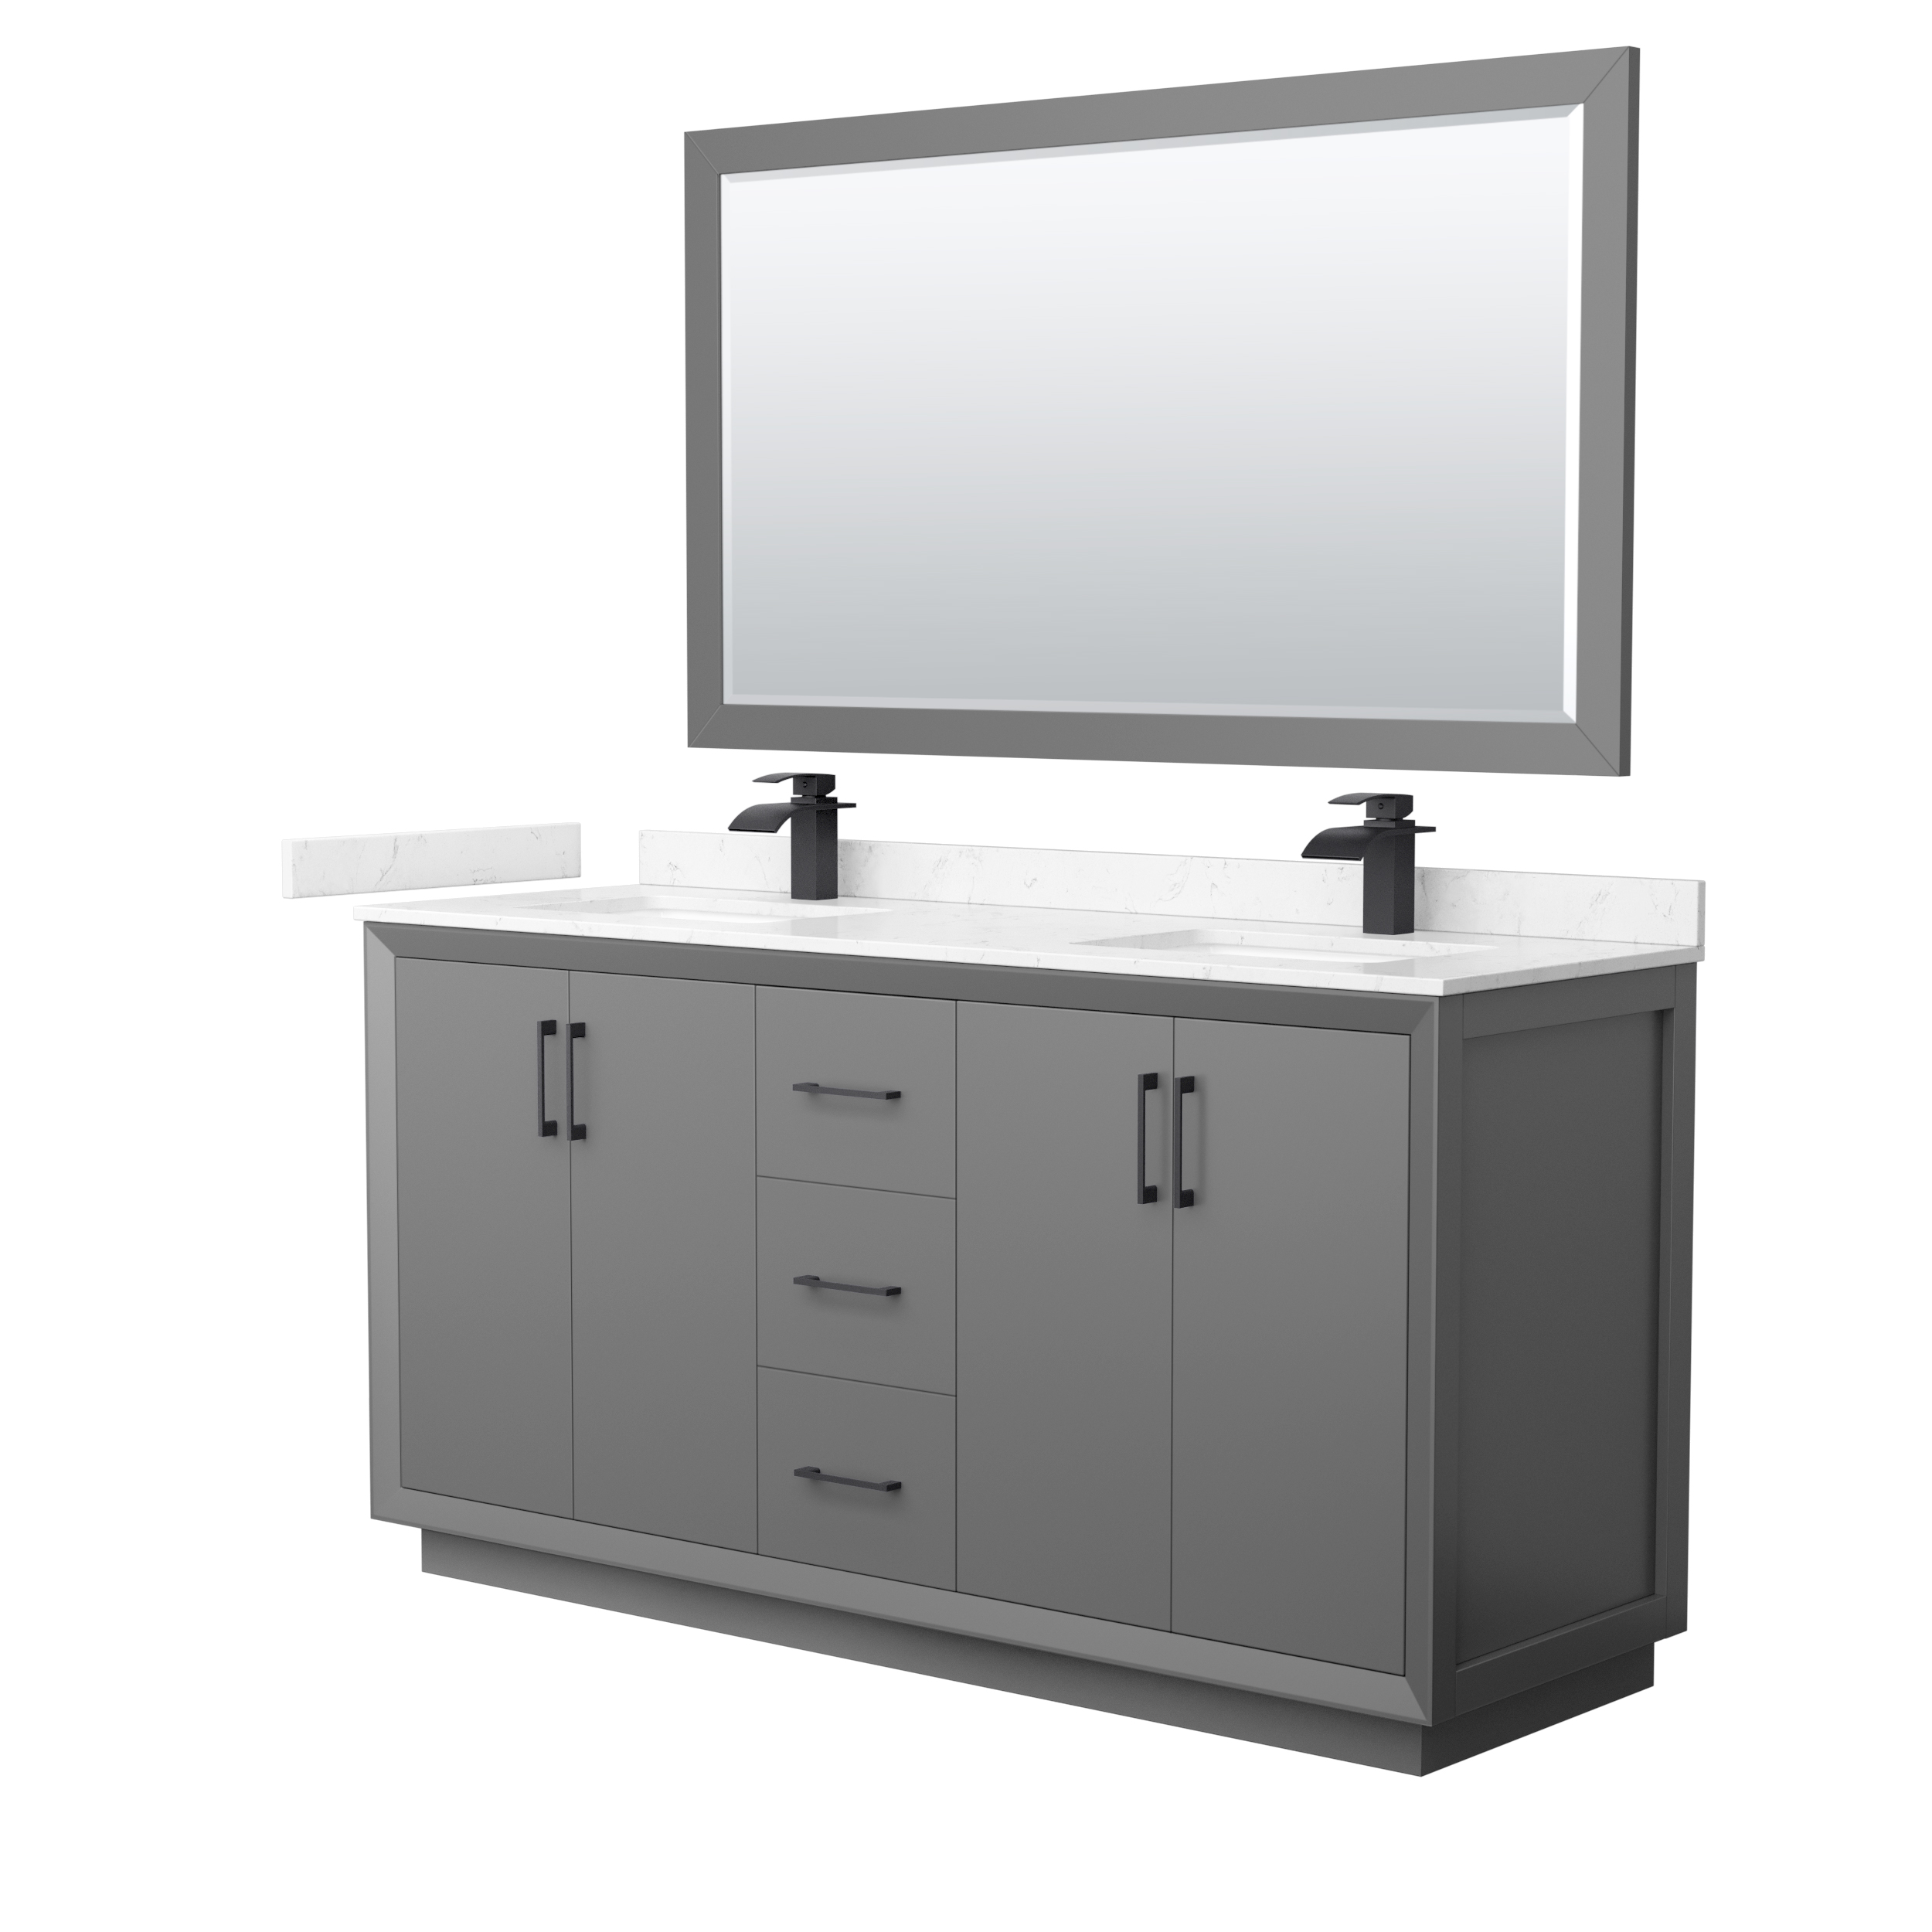 66" Transitional Double Vanity Base in Dark Grey, 3 Top Option, with 3 Hardware Options and Mirror Option